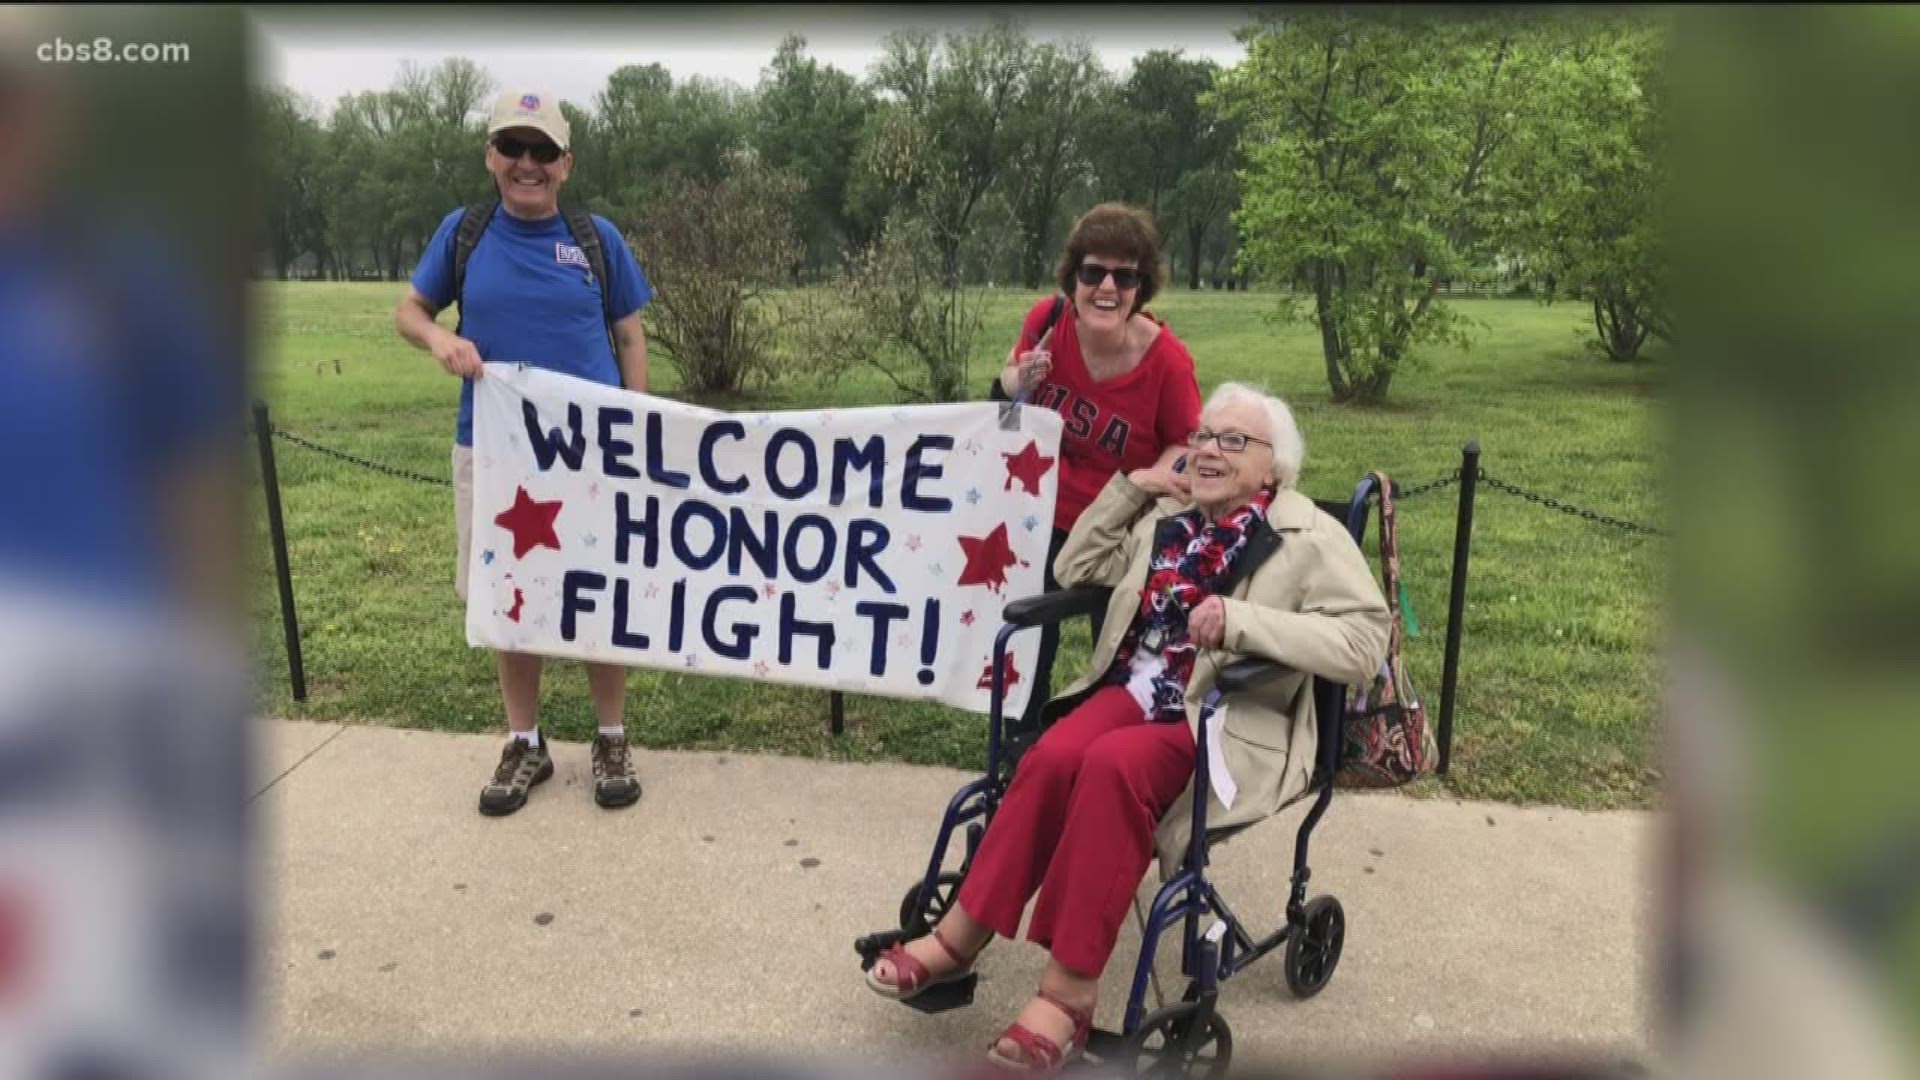 During Honor Flight, Evelyn Dene Sooy was a special visitor at the Women in Military Service for America Memorial.